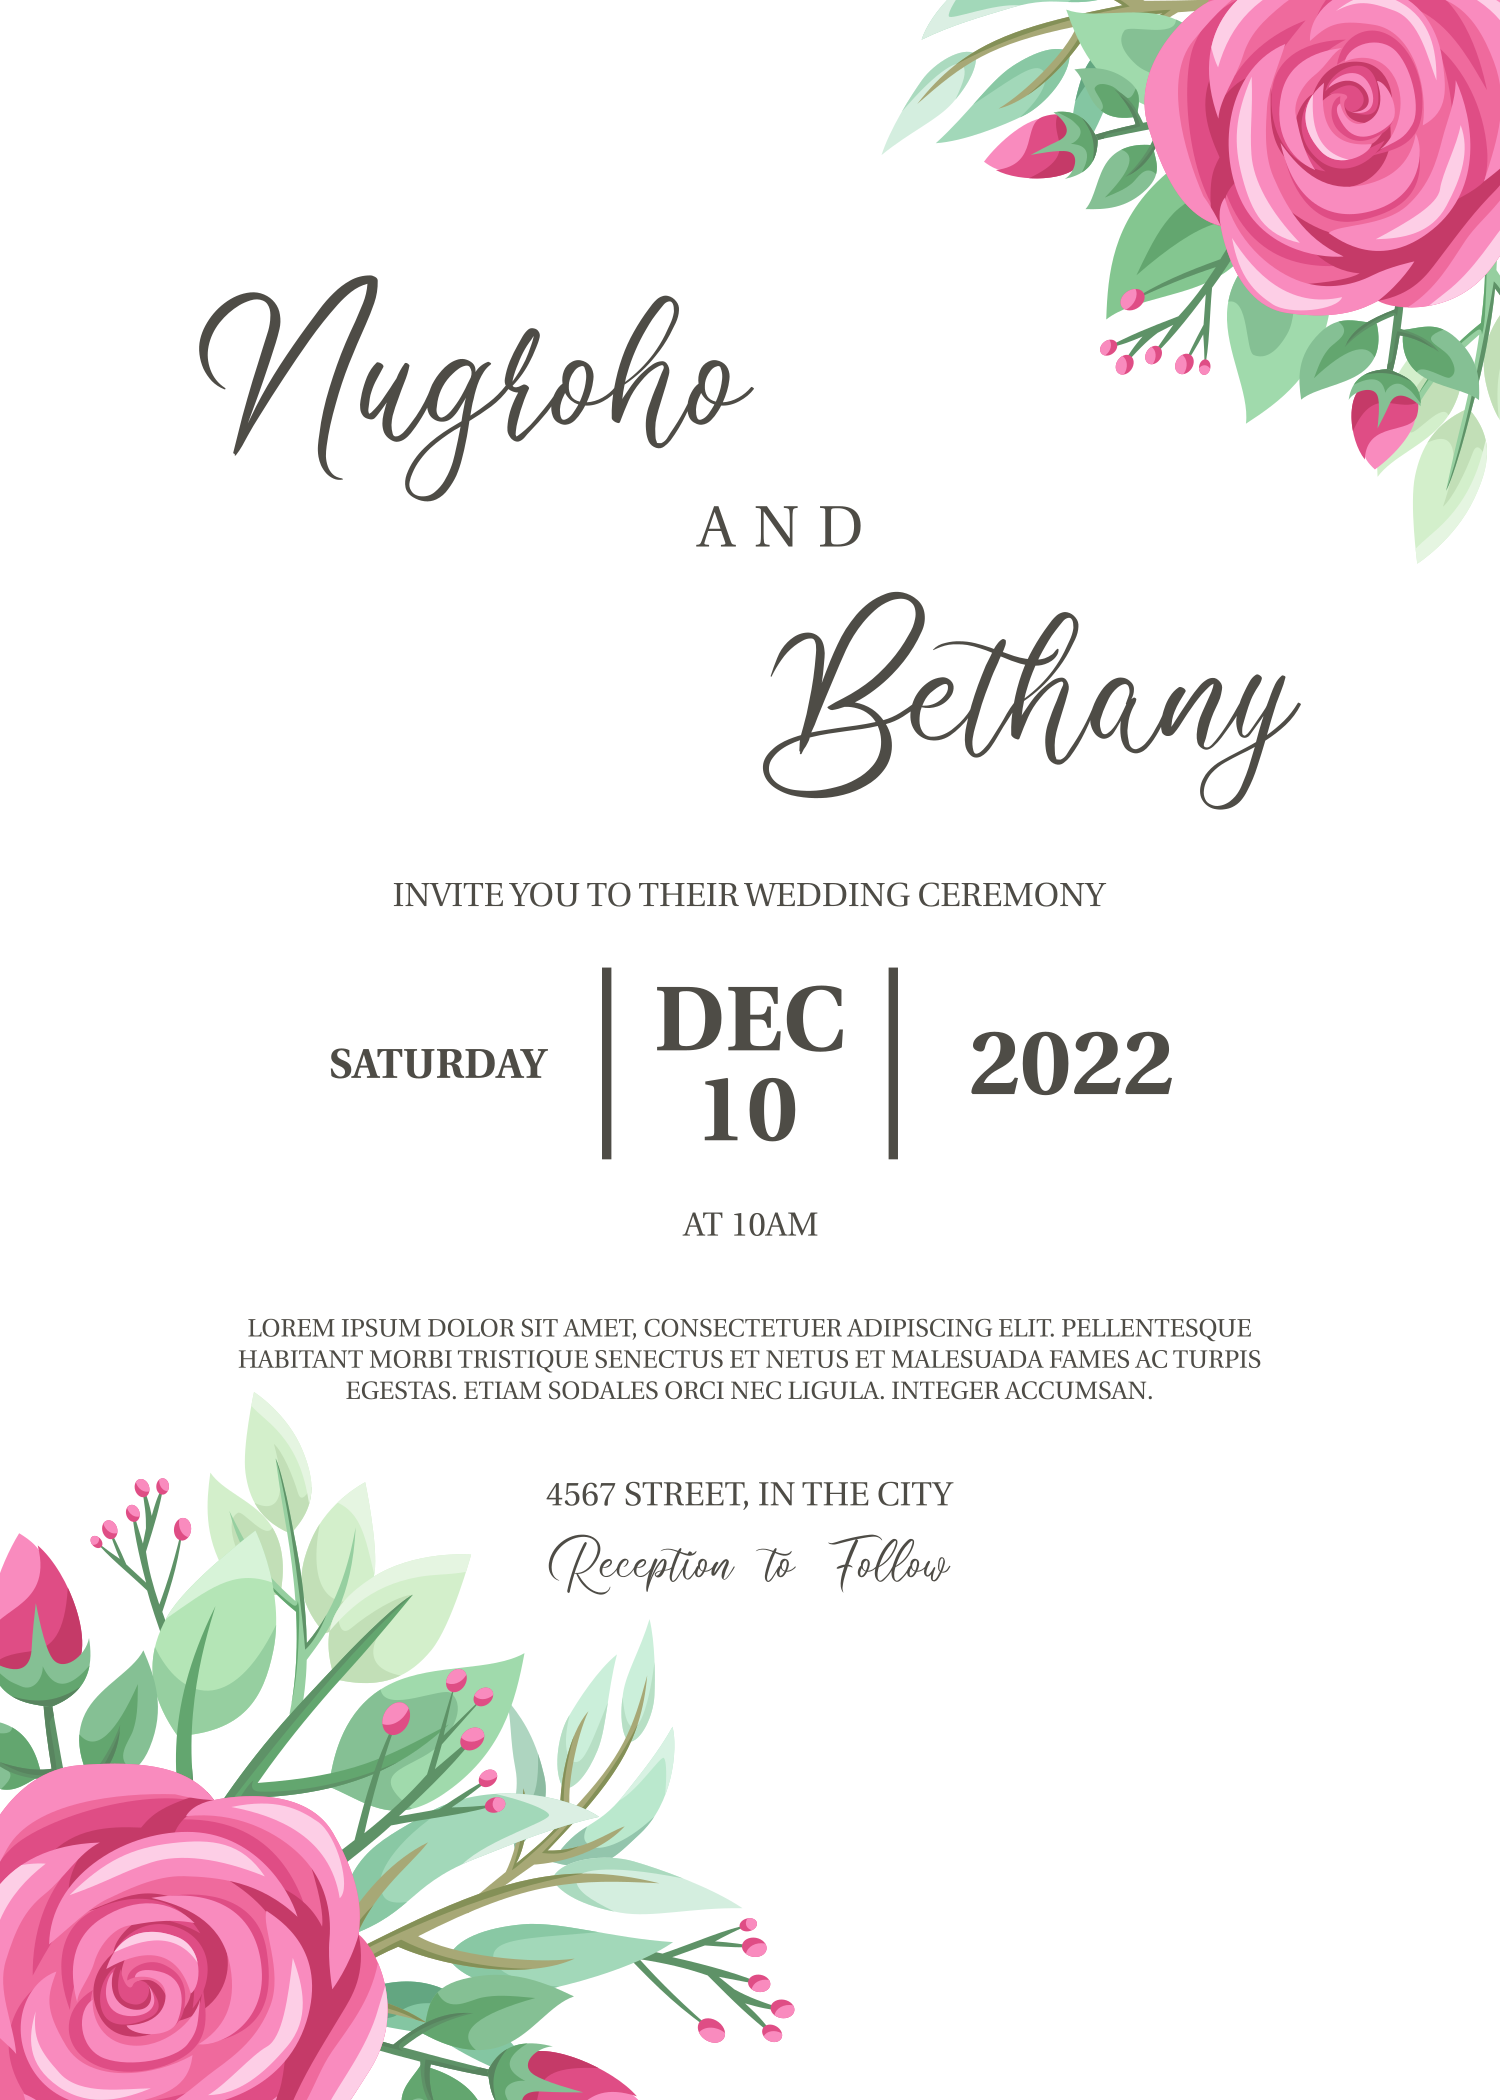 Greenery Wedding Invitation Template With Rose Ornament Postcard Example.